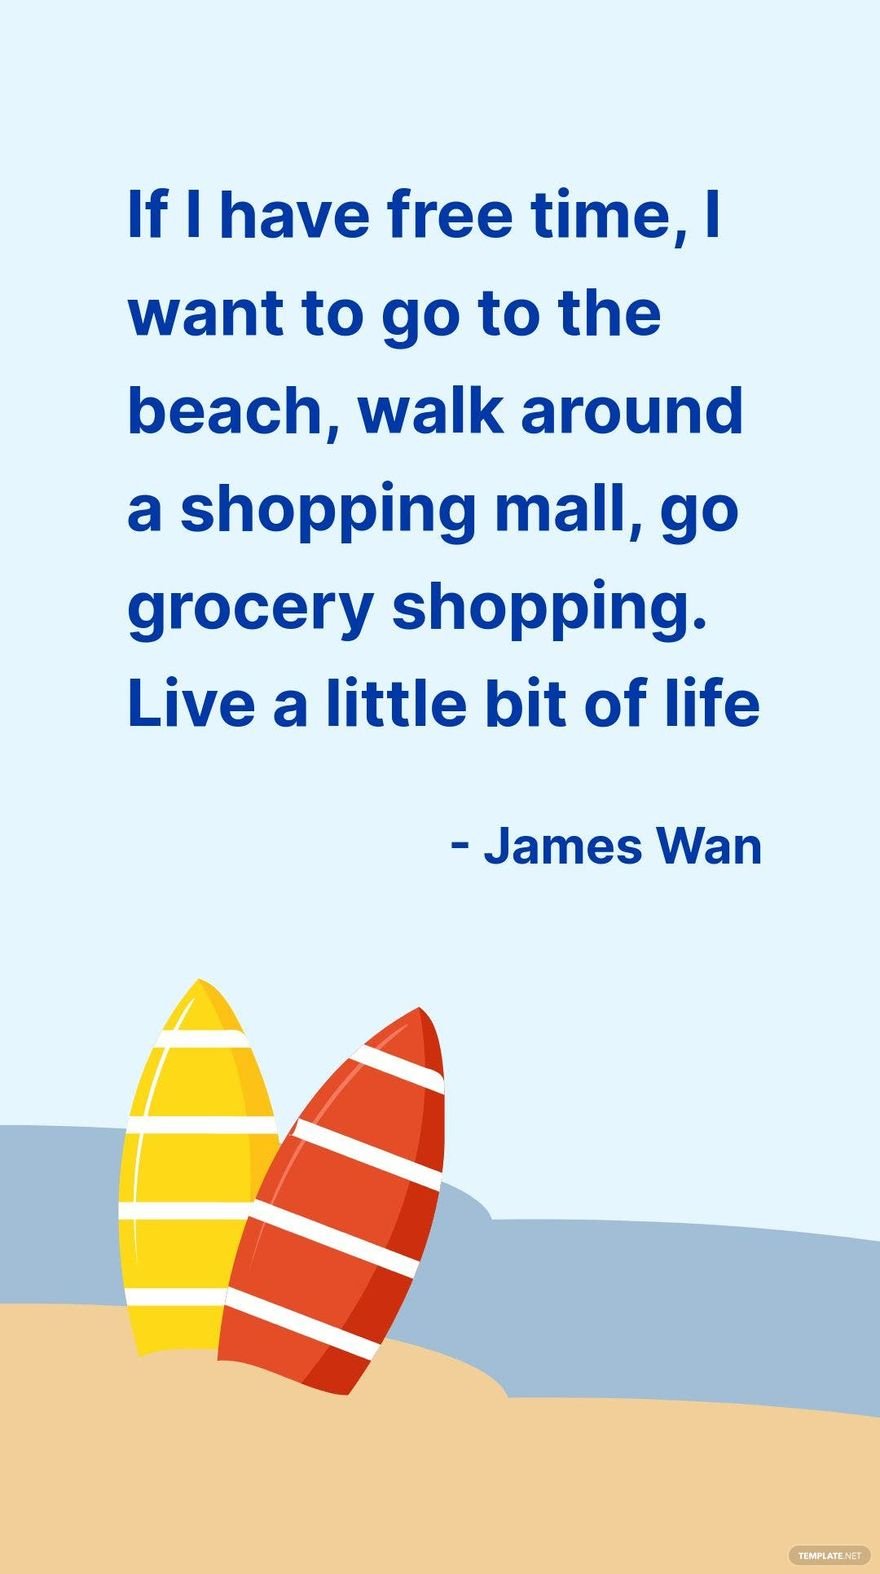 Free James Wan - If I have time, I want to go to the beach, walk around a shopping mall, go grocery shopping. Live a little bit of life in JPG